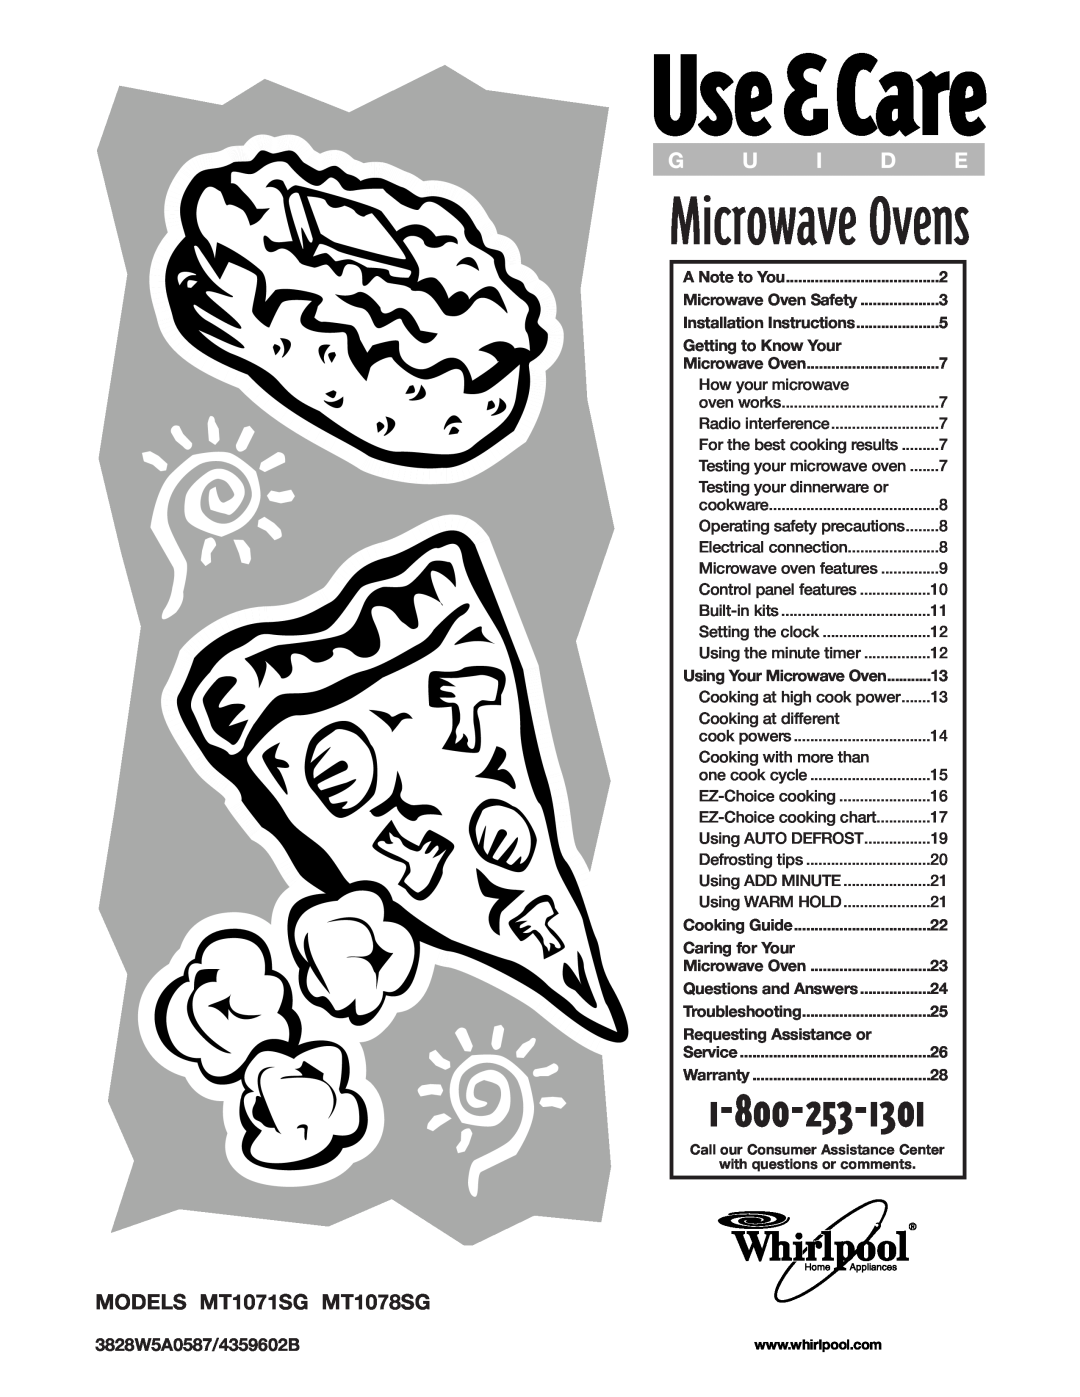 Whirlpool installation instructions Microwave Ovens, MODELS MT1071SG MT1078SG 